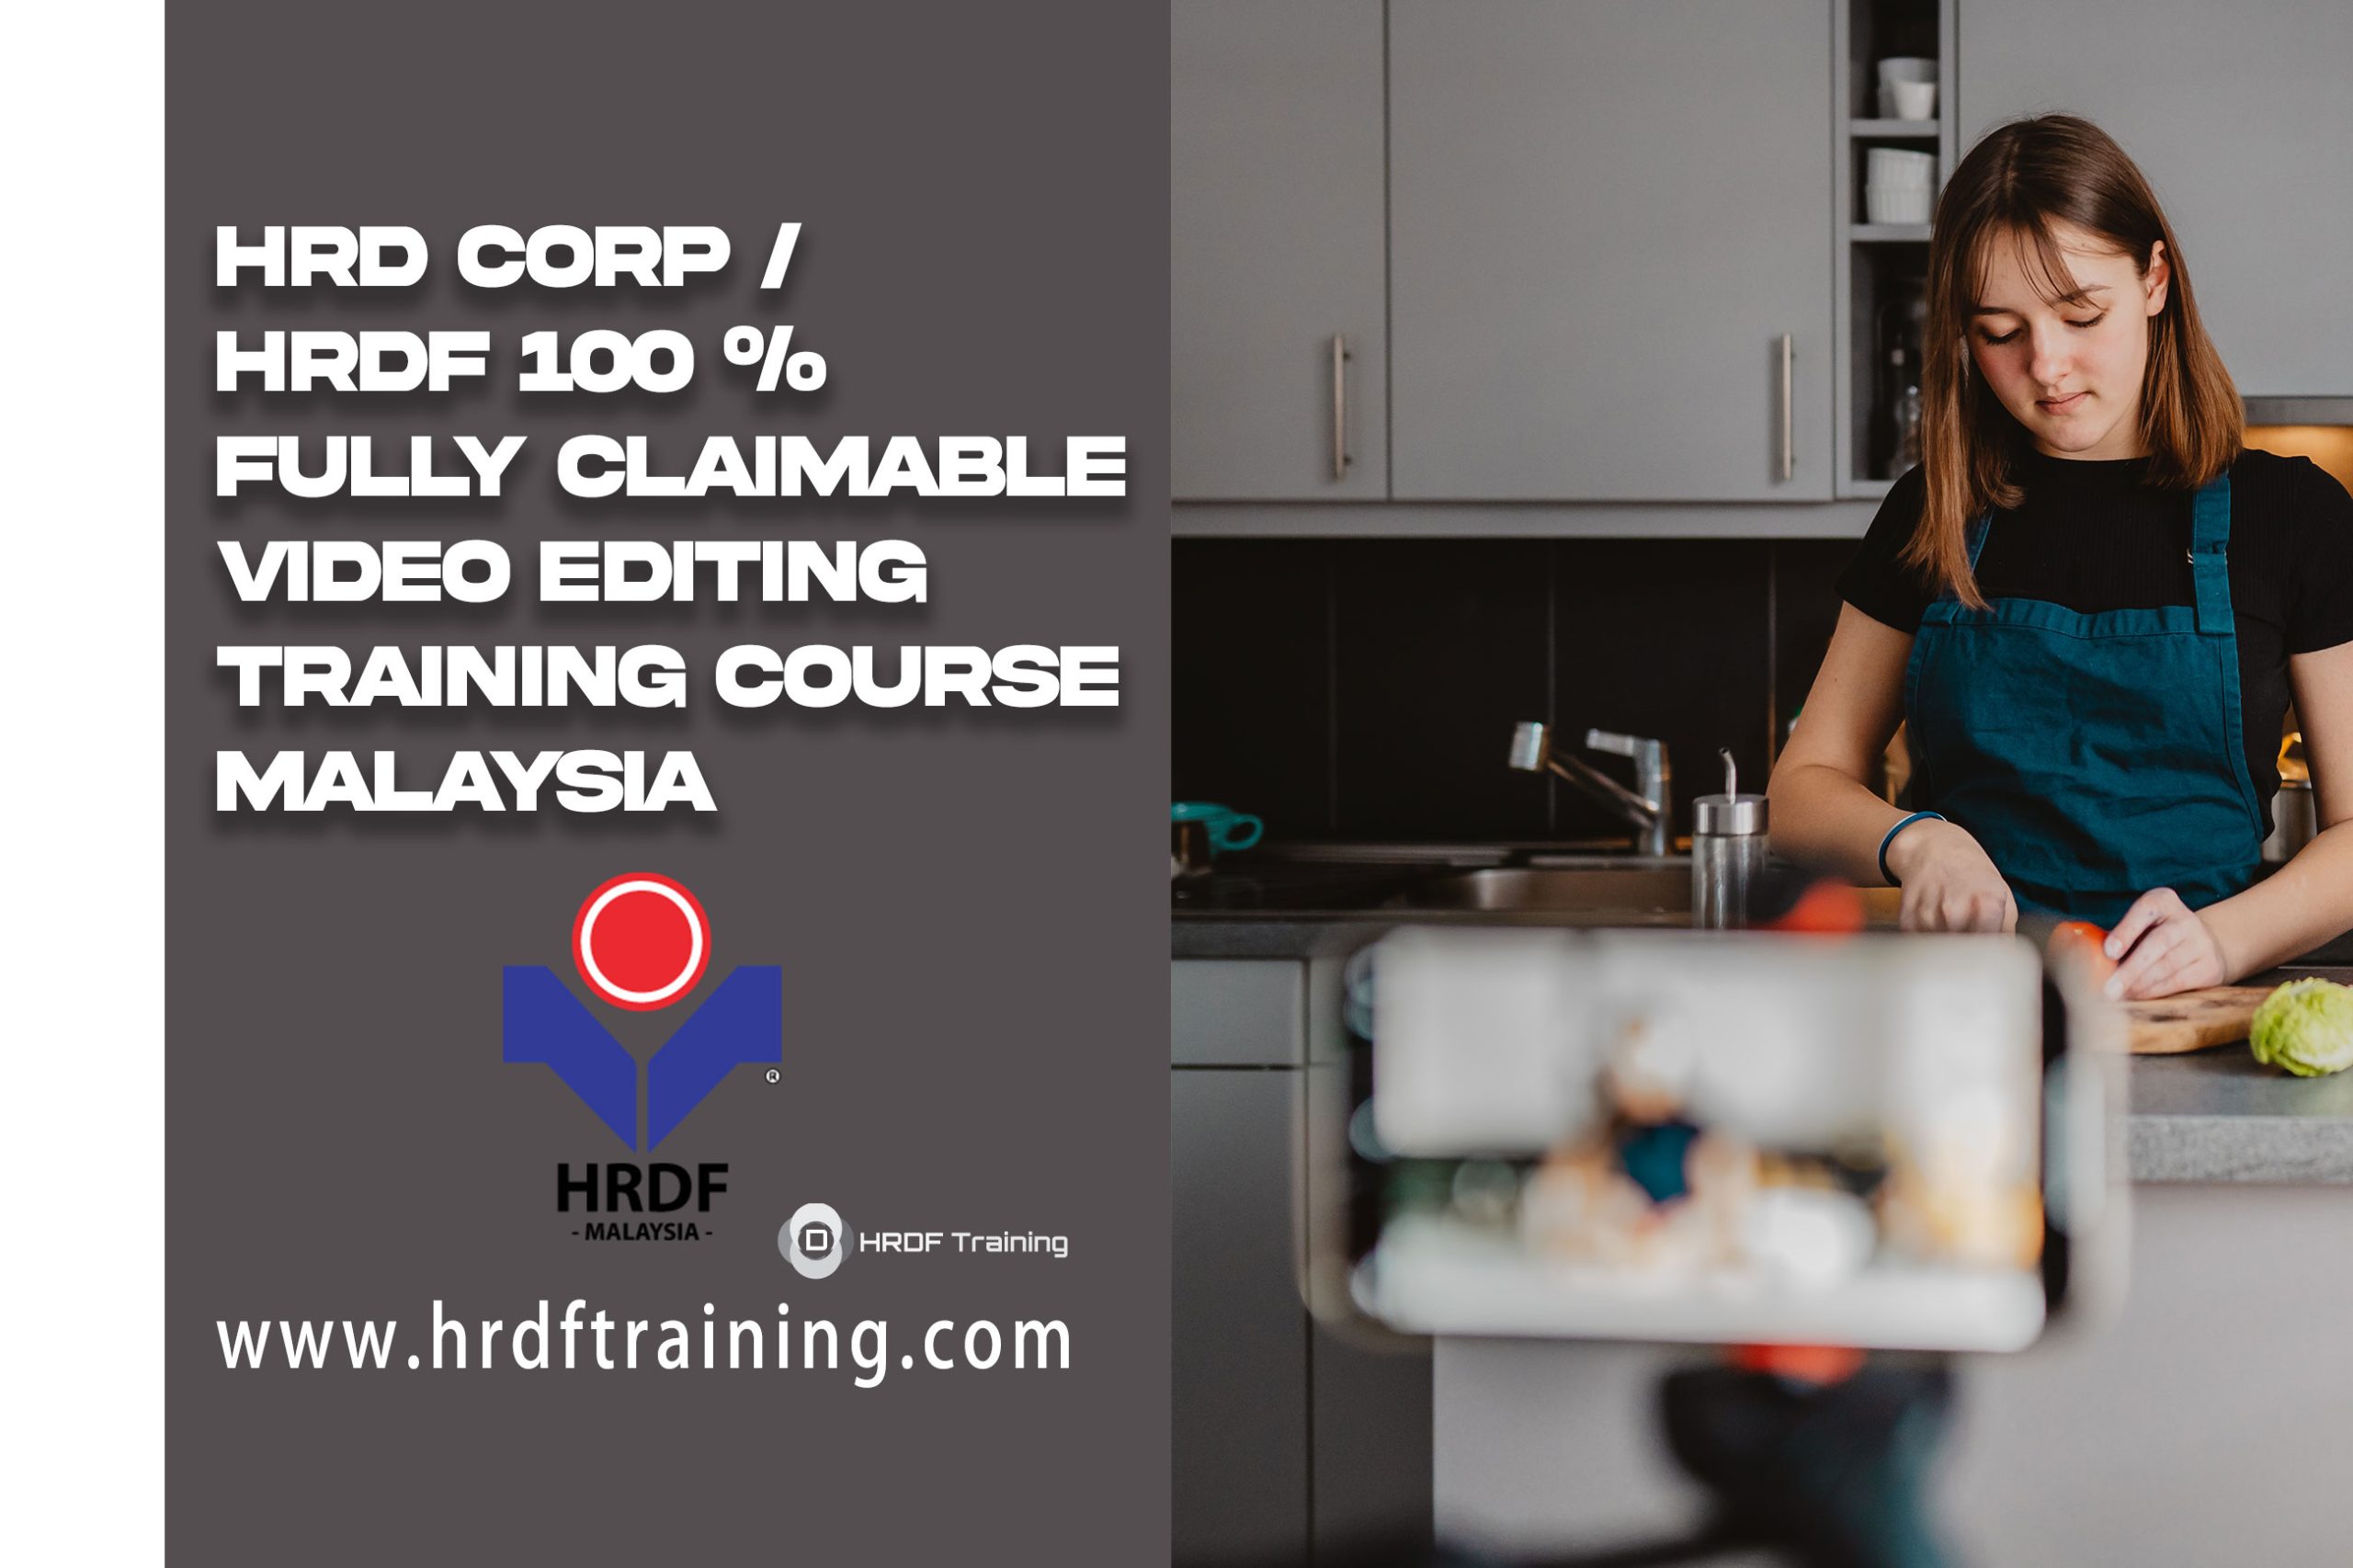 HRDF HRD Corp Claimable Video Editing Training Course Malaysia - February 2022